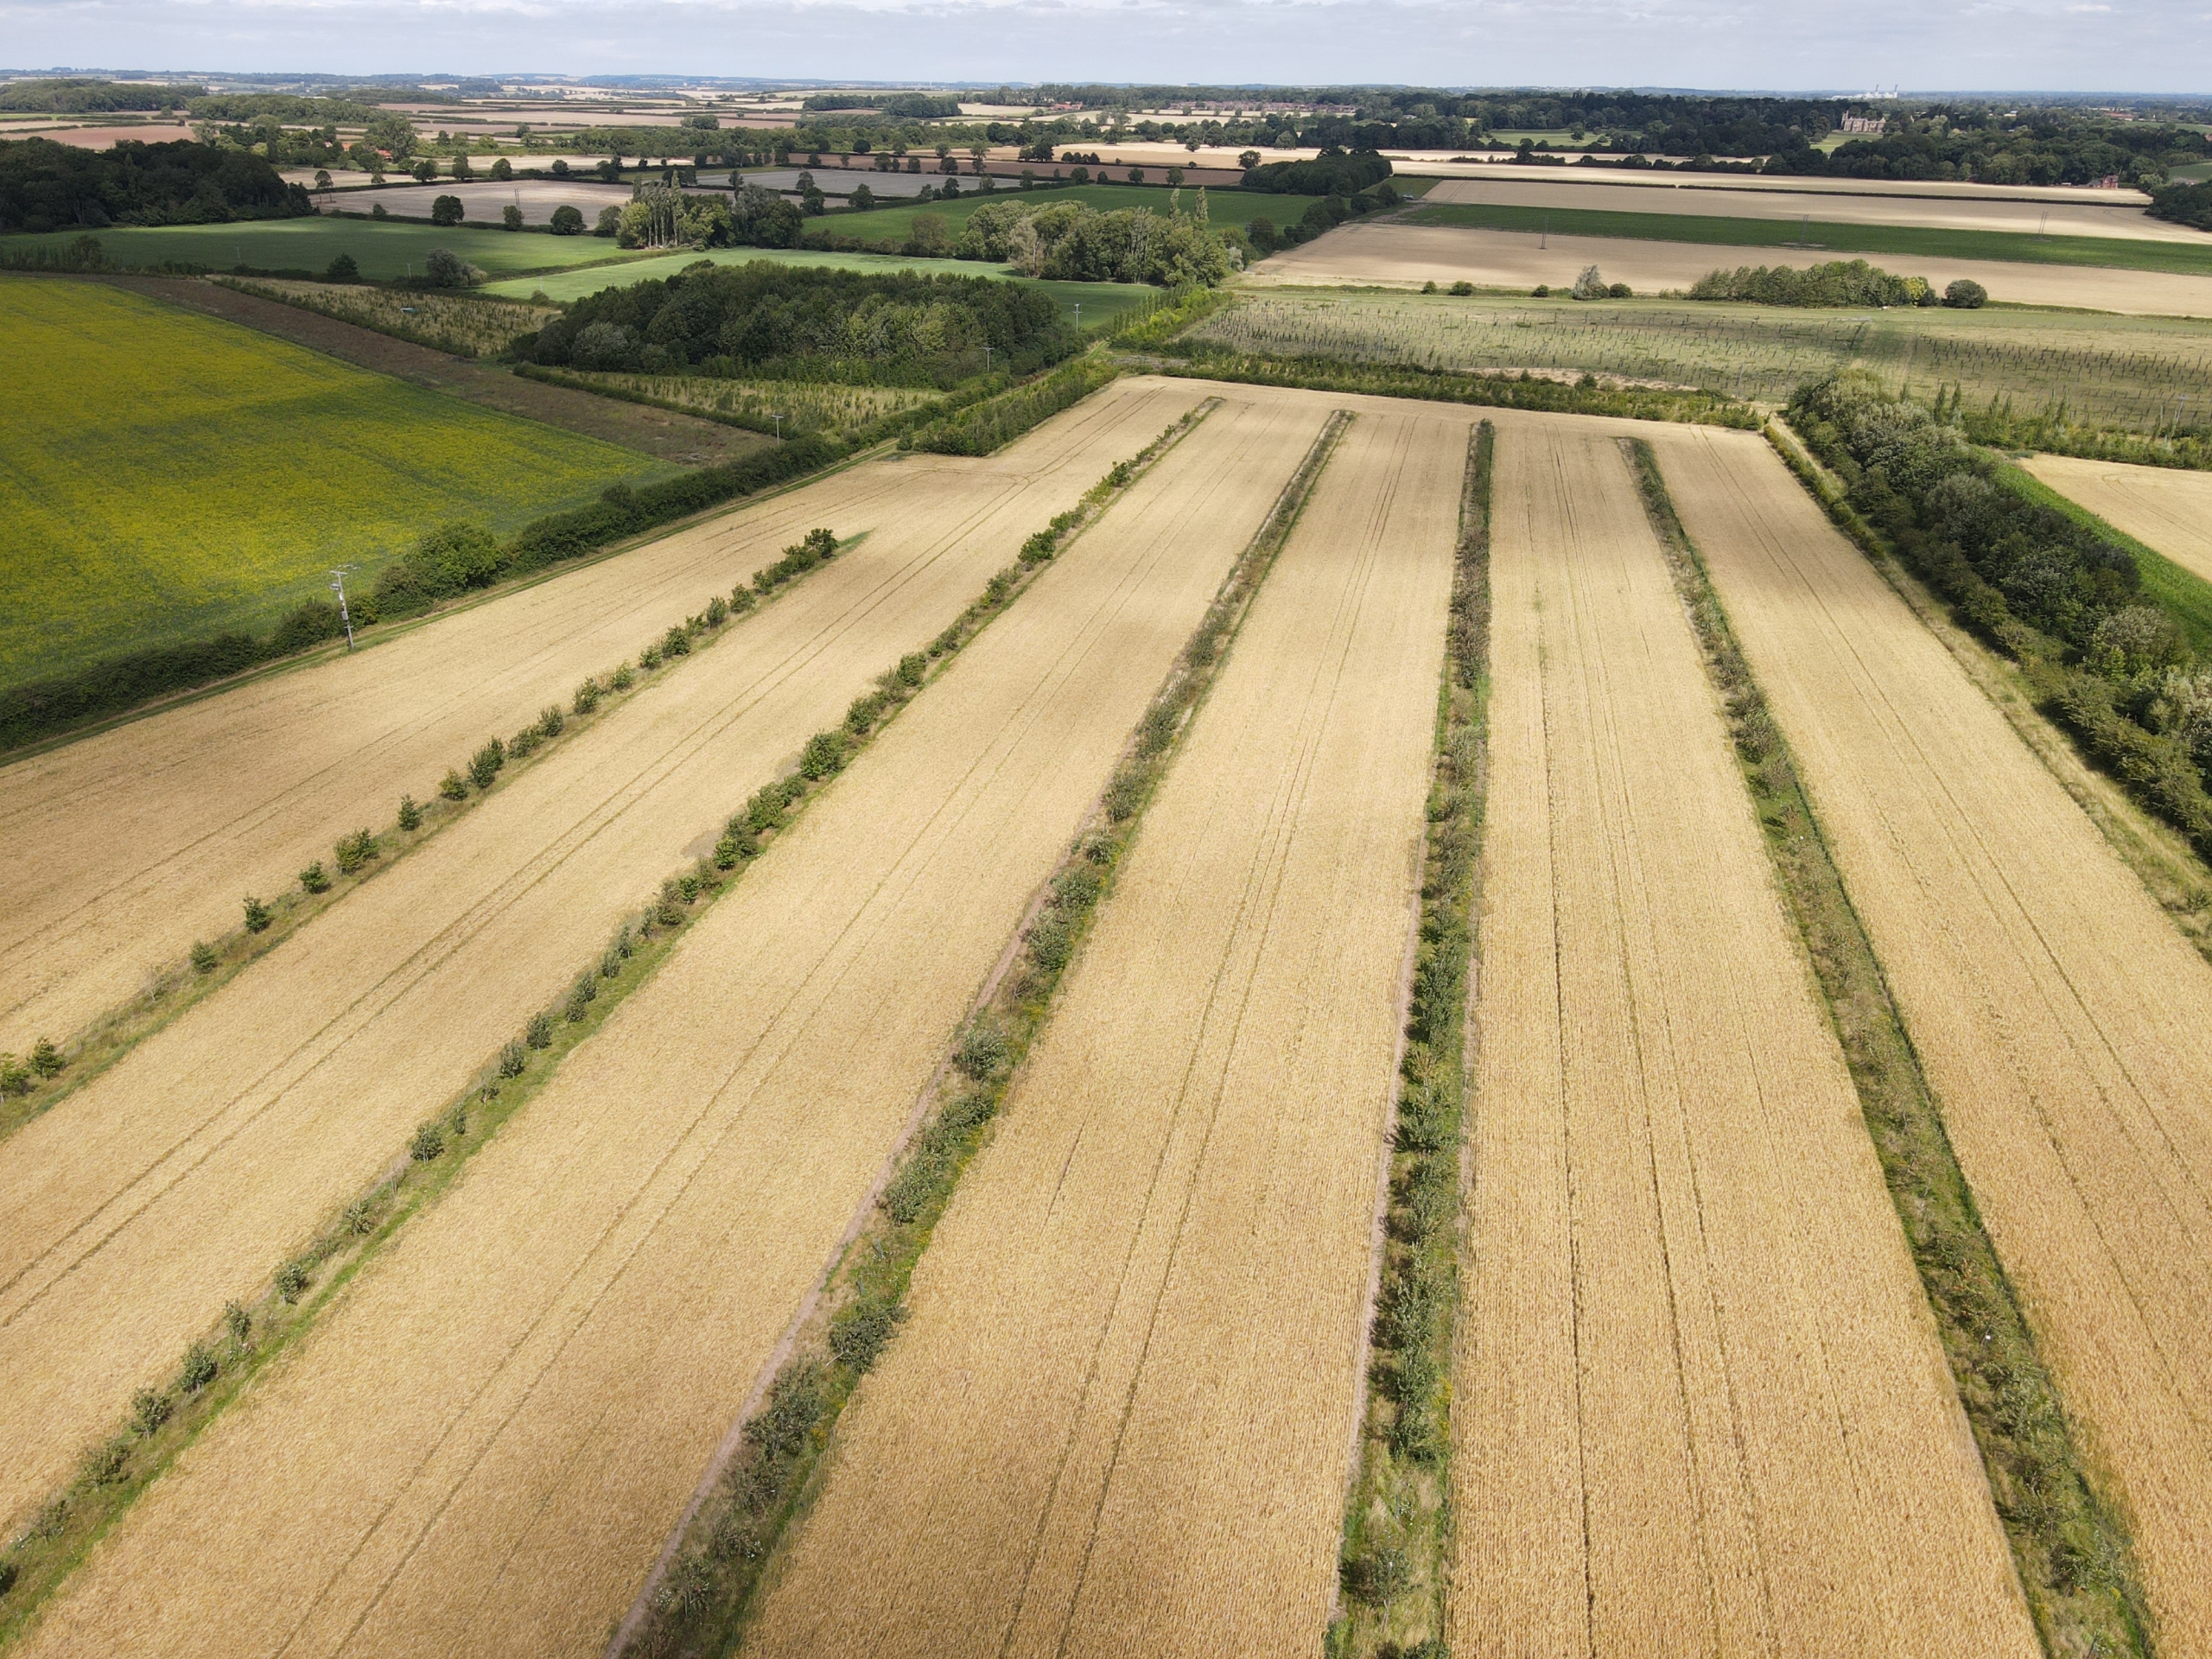 Home Farm from above showing trial areas and utilisation of marginal land